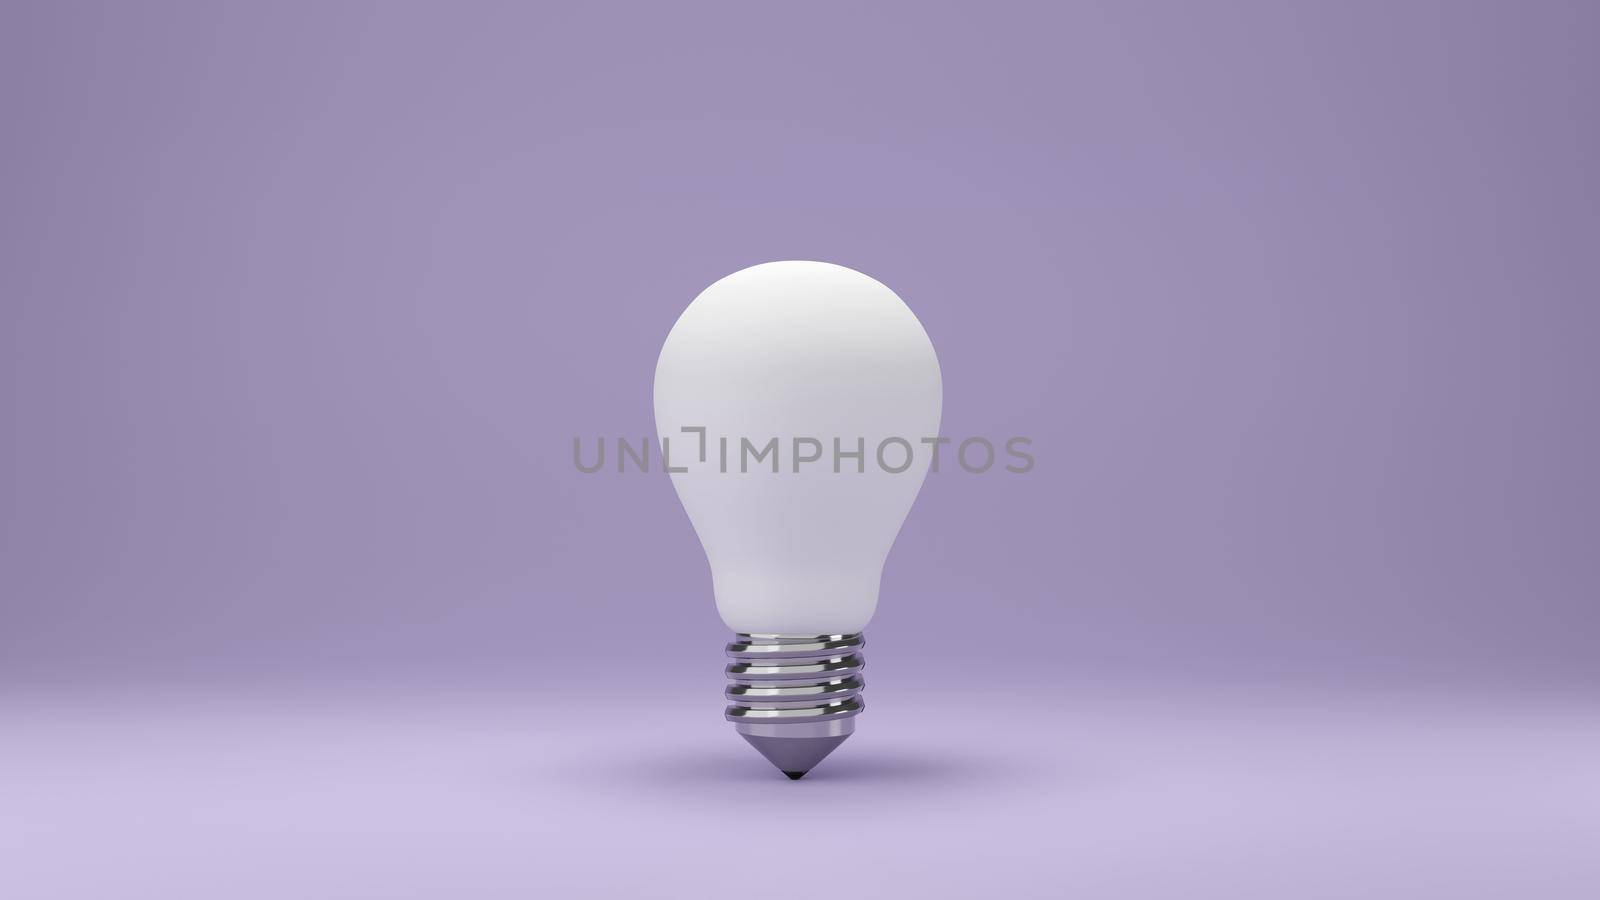 White light bulb on bright purple background in pastel colors. Minimalist concept, bright idea concept, isolated lamp. 3d render illustration by raferto1973